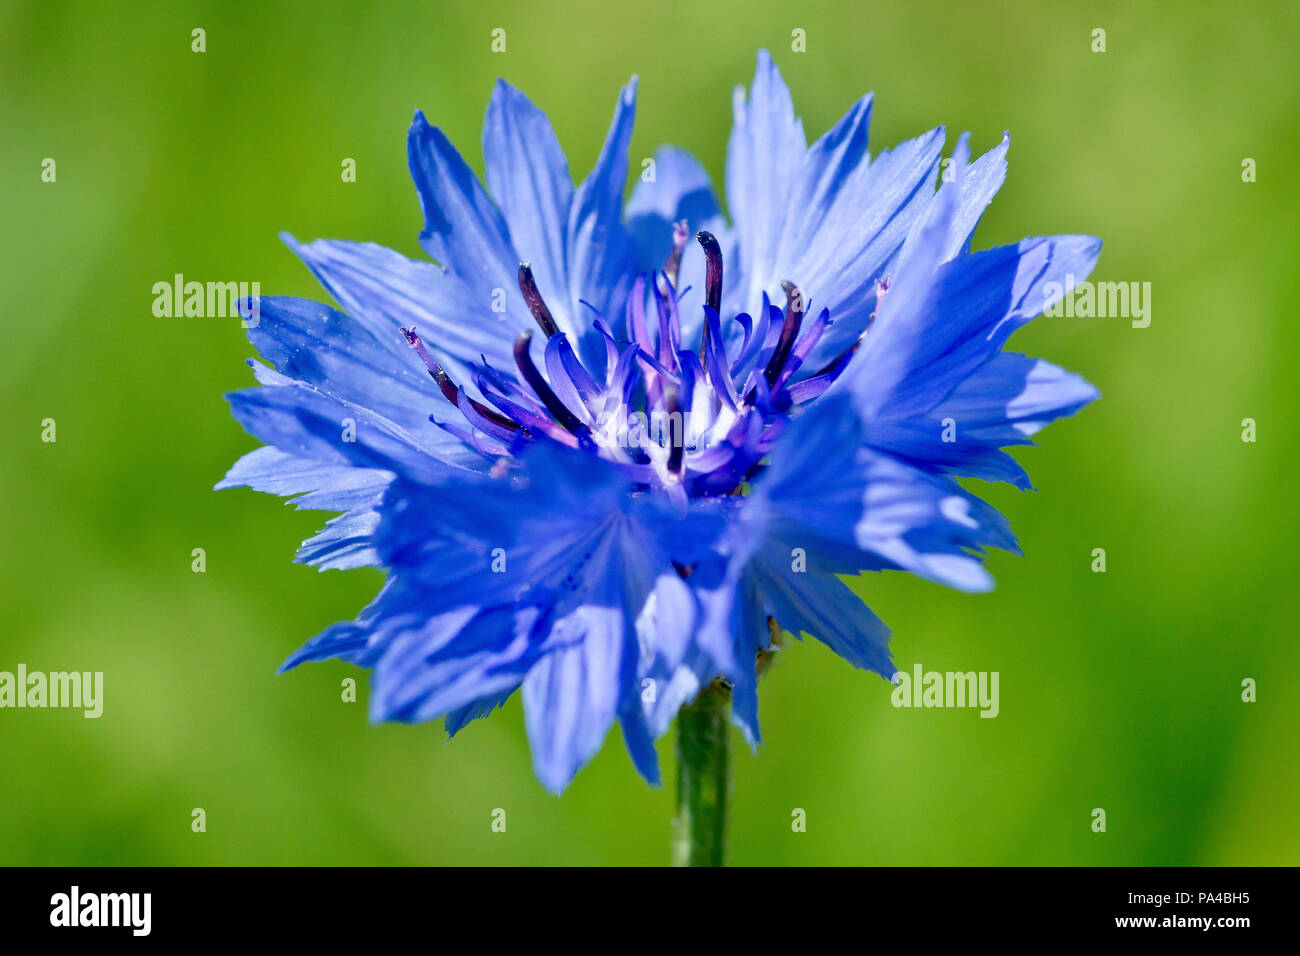 Cornflower (centaurea cyanus), close up of a solitary flower against a plain green background. Also known as Bluebottle. Stock Photo